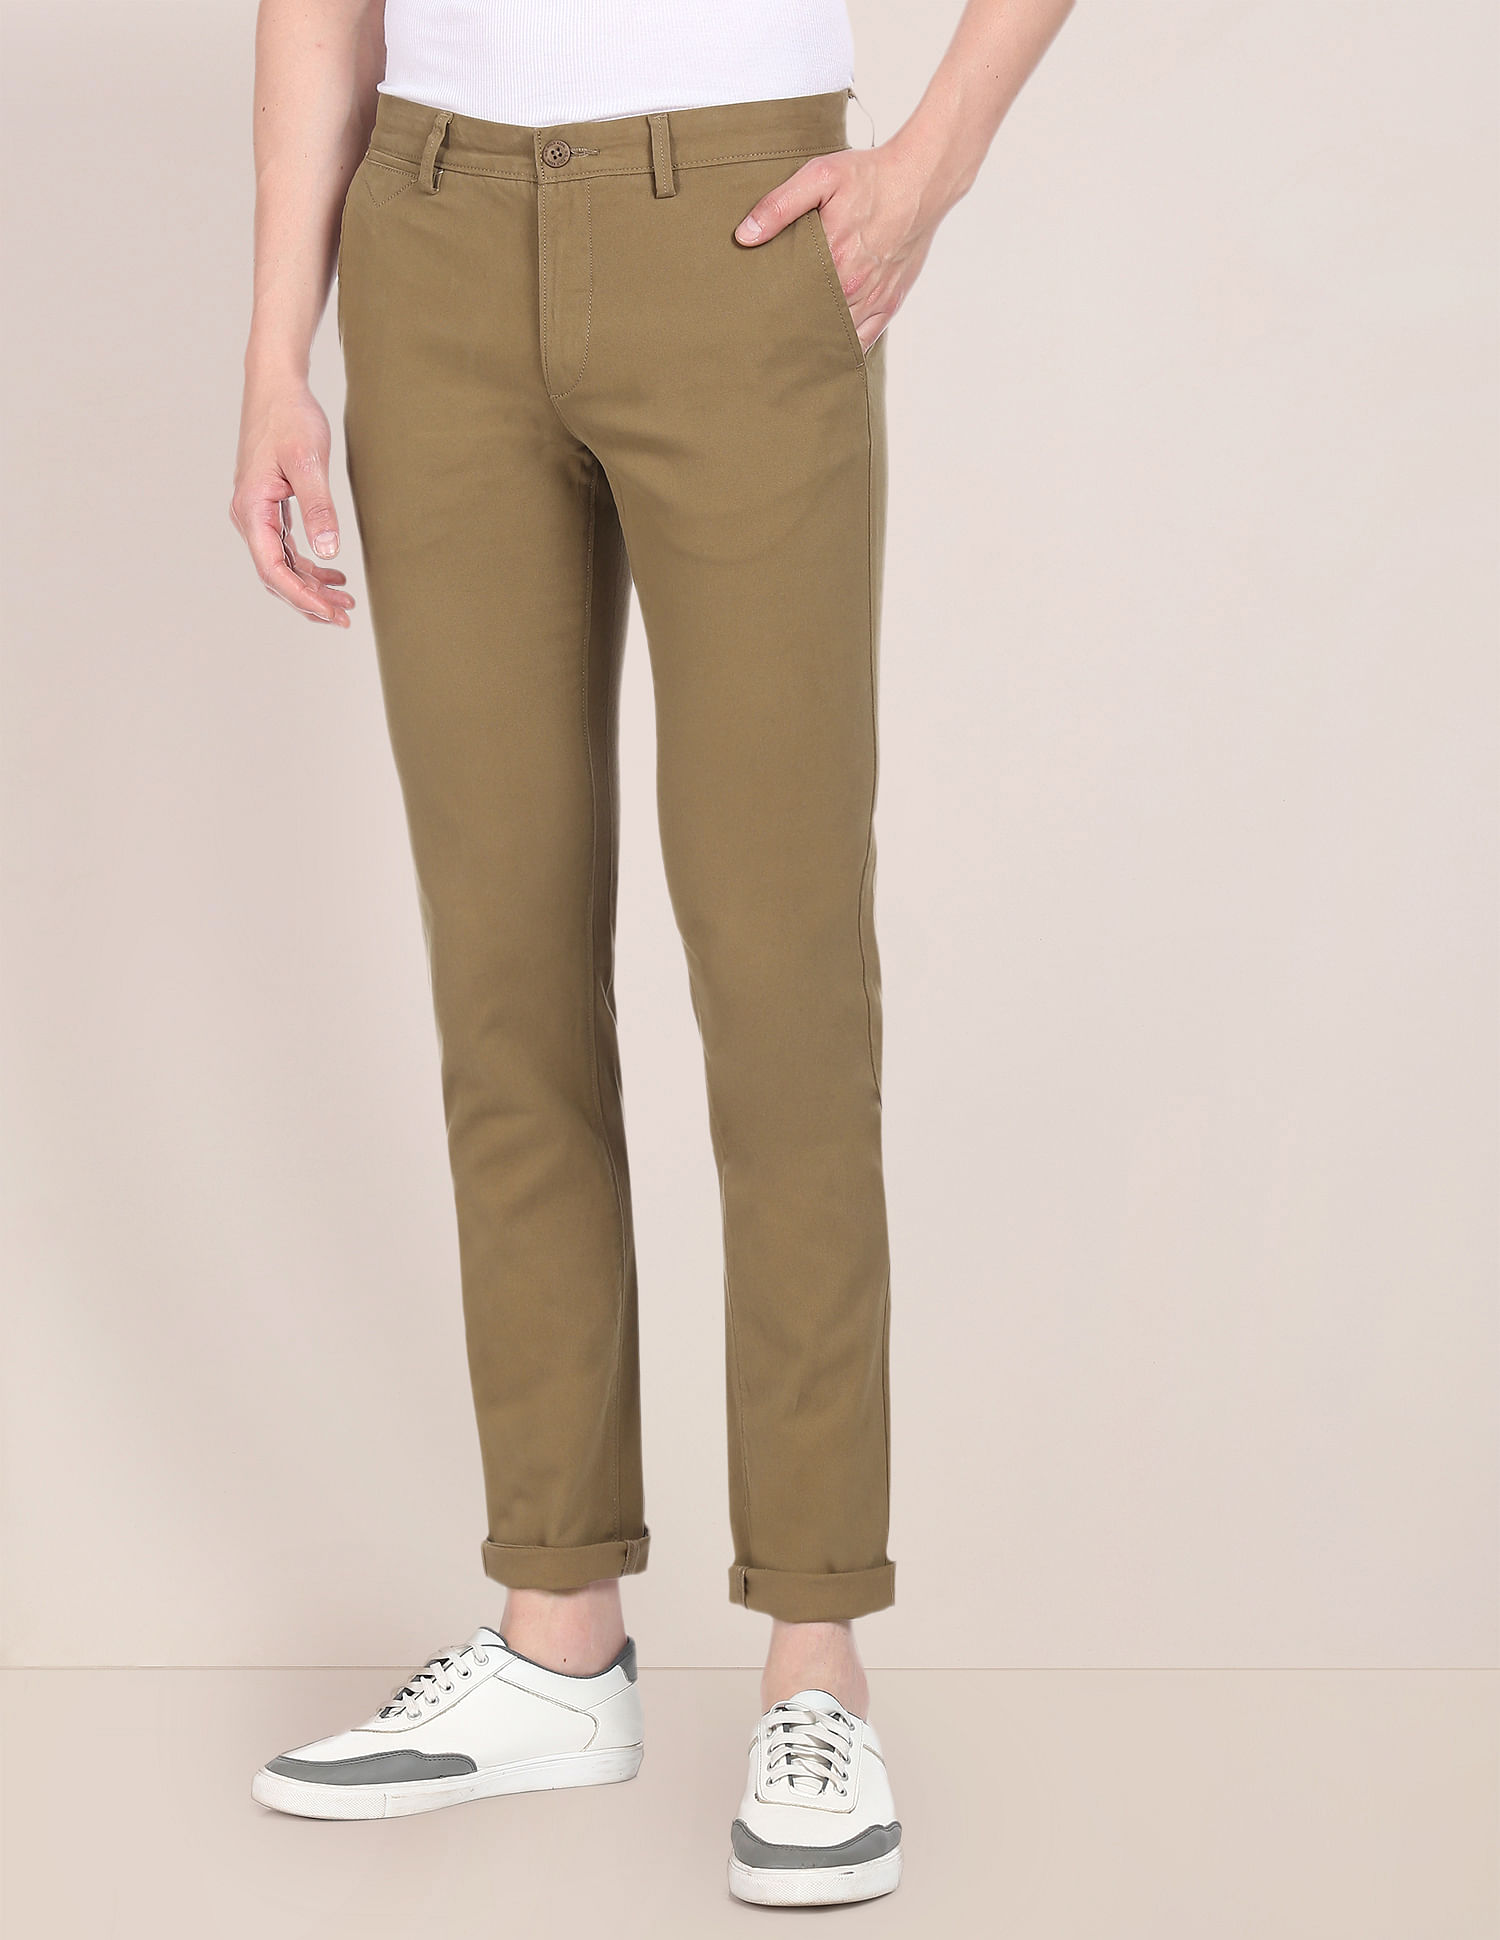 Brown Trousers For Women Online – Buy Brown Trousers Online in India